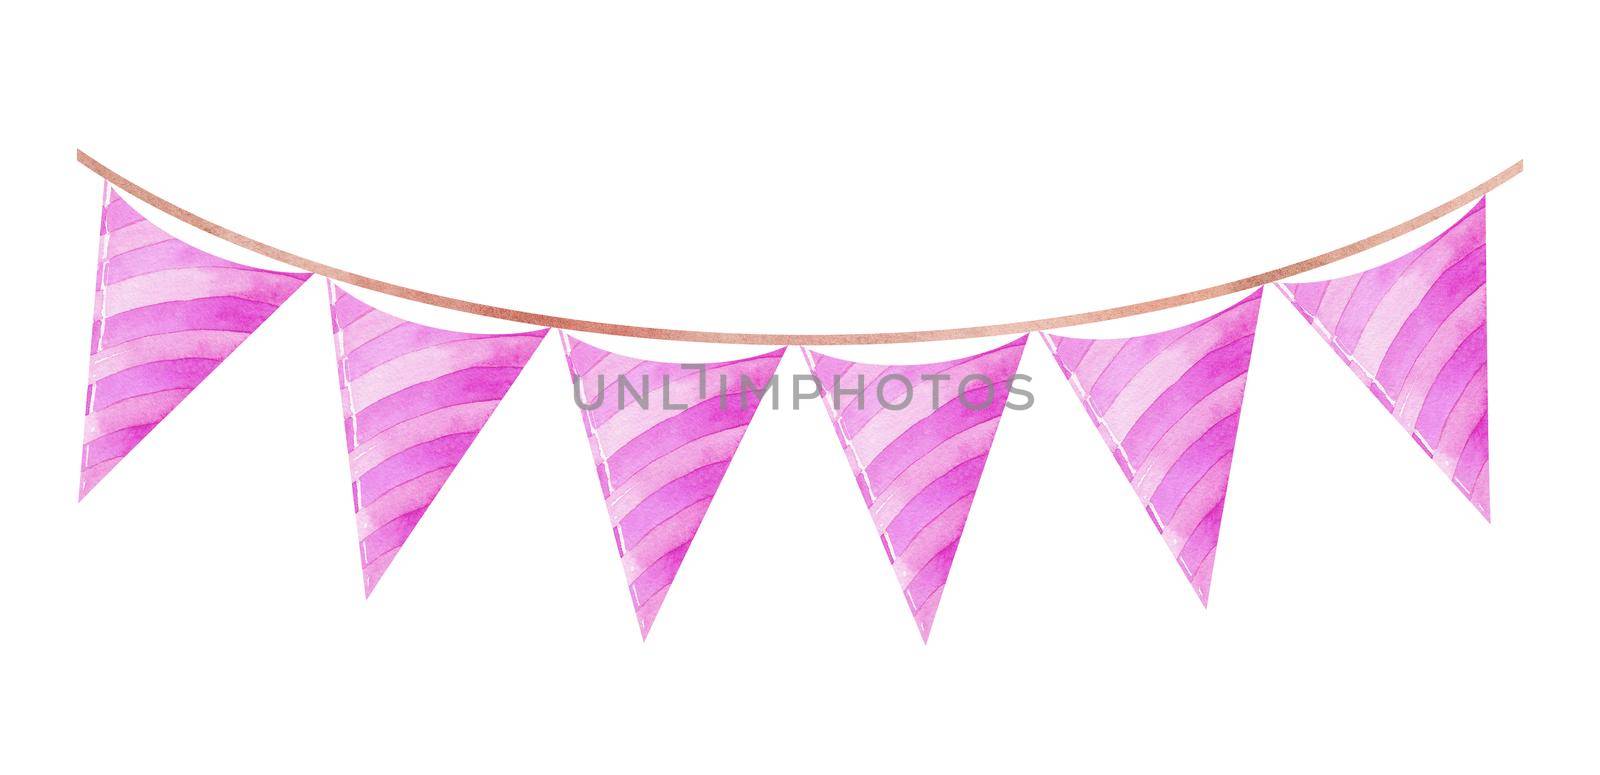 Watercolor pink bunting flags isolated on white background. Birthday party garland, greeting card decor by dreamloud